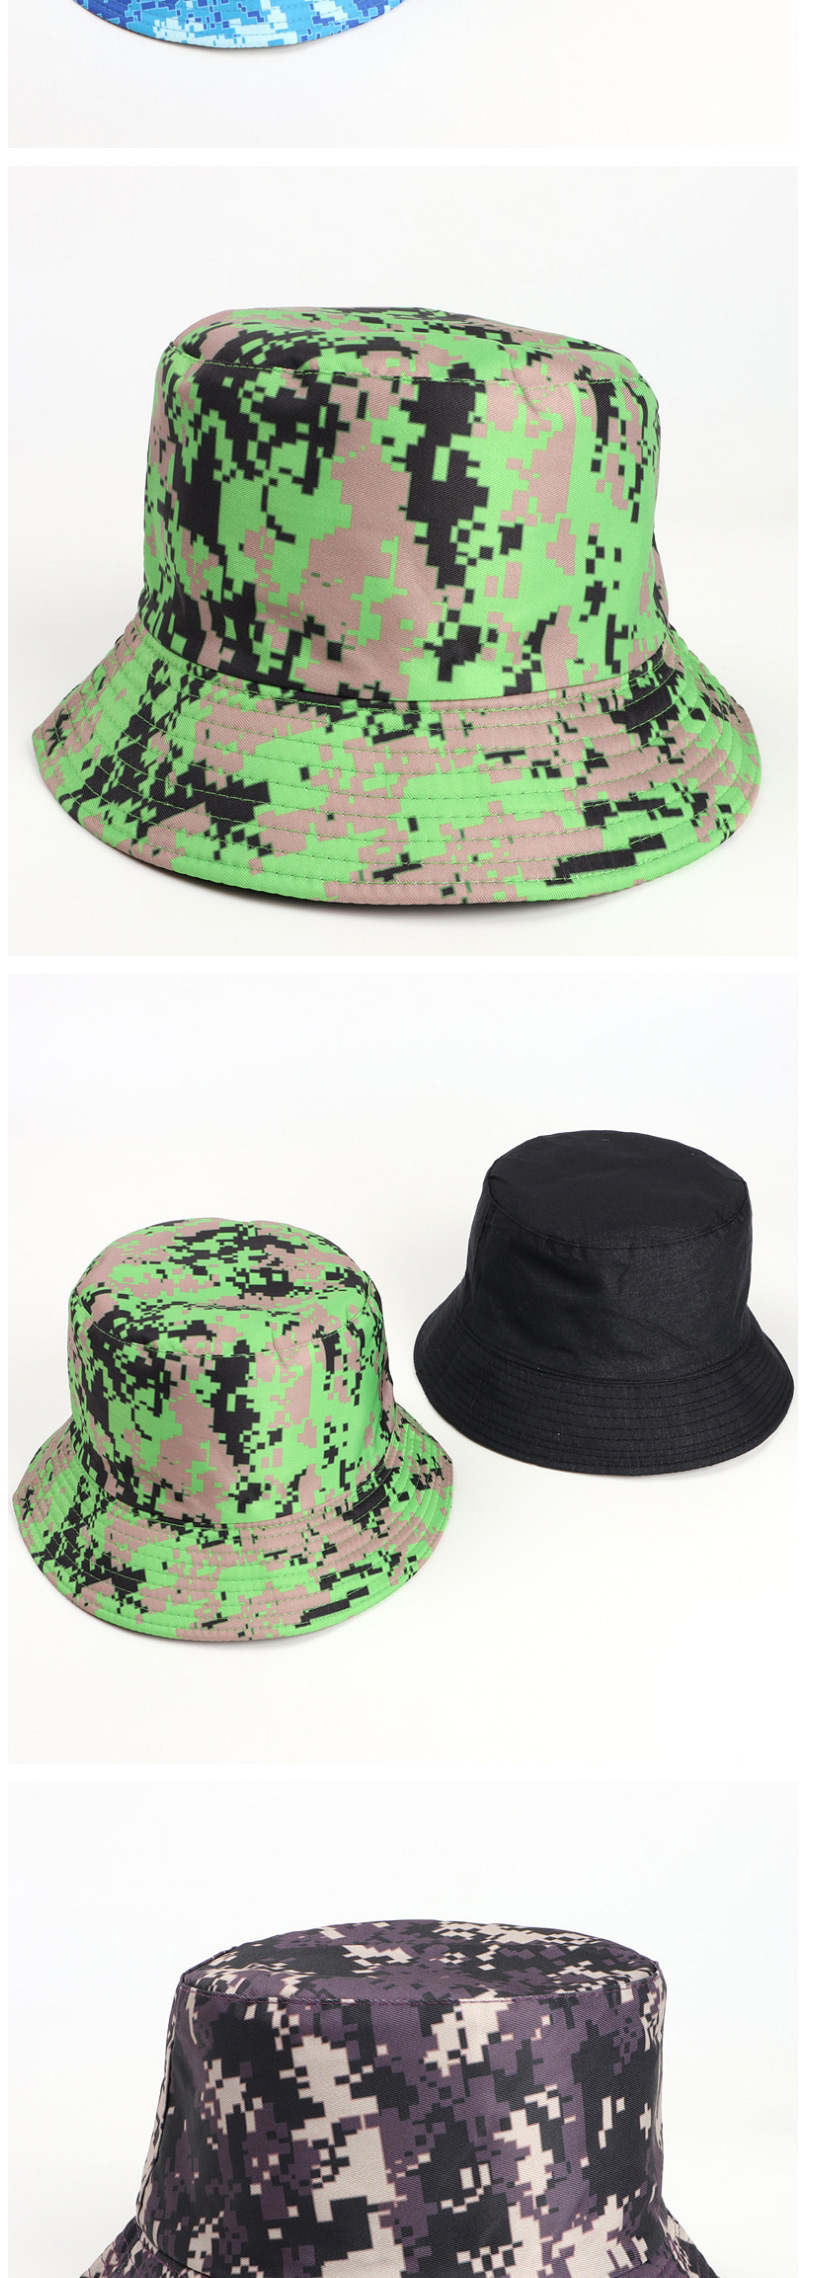 Fashion Digital Camouflage-sea Blue Printed Double-sided Multicolor Camouflage Fisherman Hat,Sun Hats